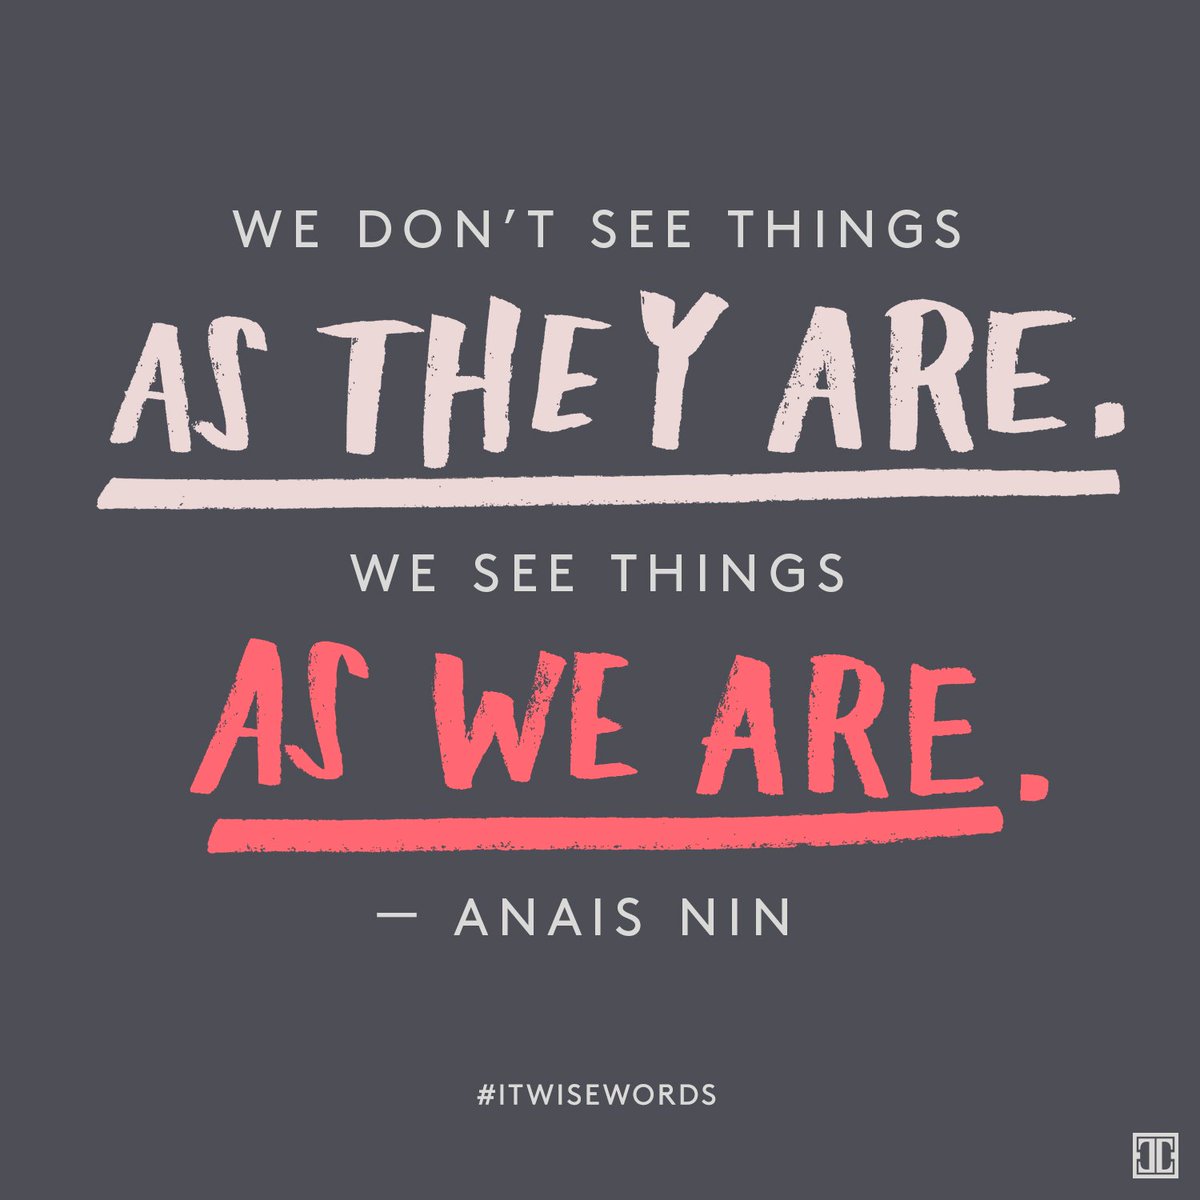 See more #ITwisewords:https://t.co/T51zlyX5sc #wisewords #quote #inspiration #AnaisNin https://t.co/ajFFX4MXjm